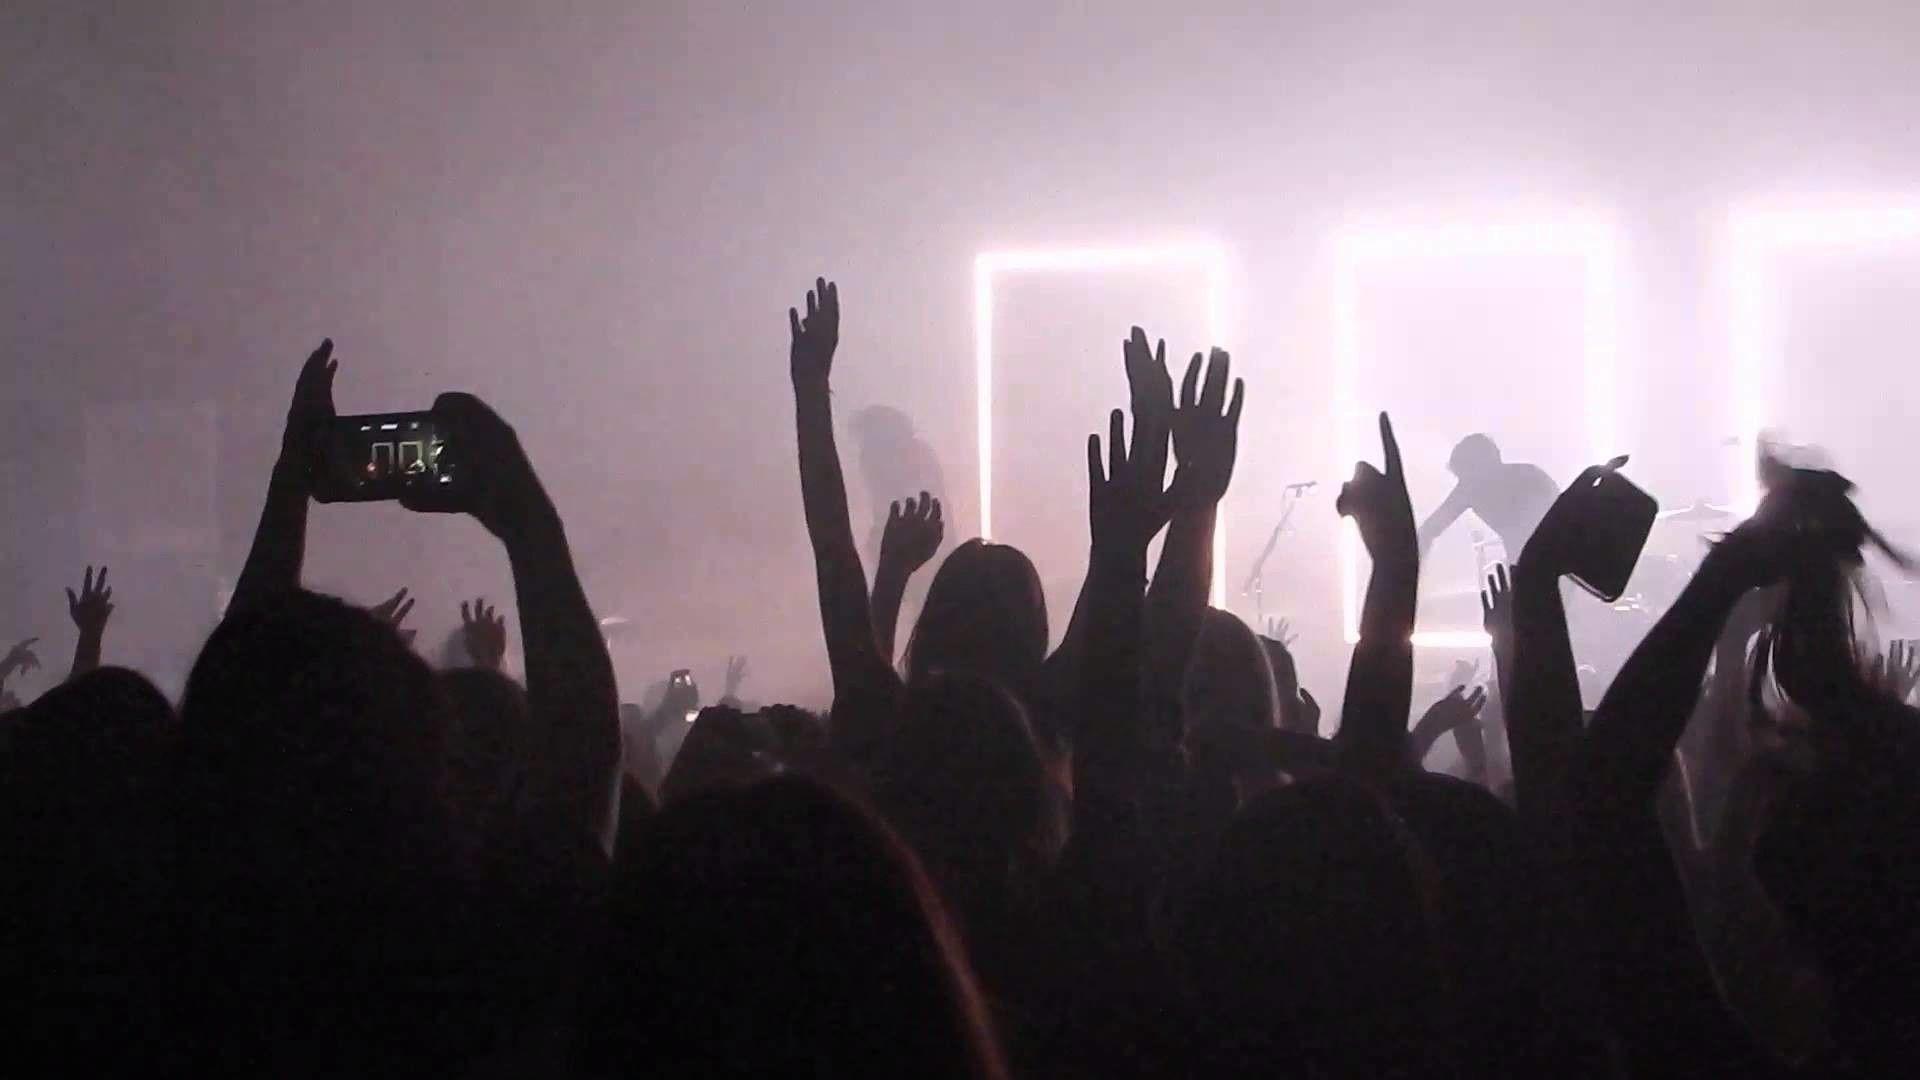 The 1975 Concert Wallpaper 24191. DFILES. FAVES